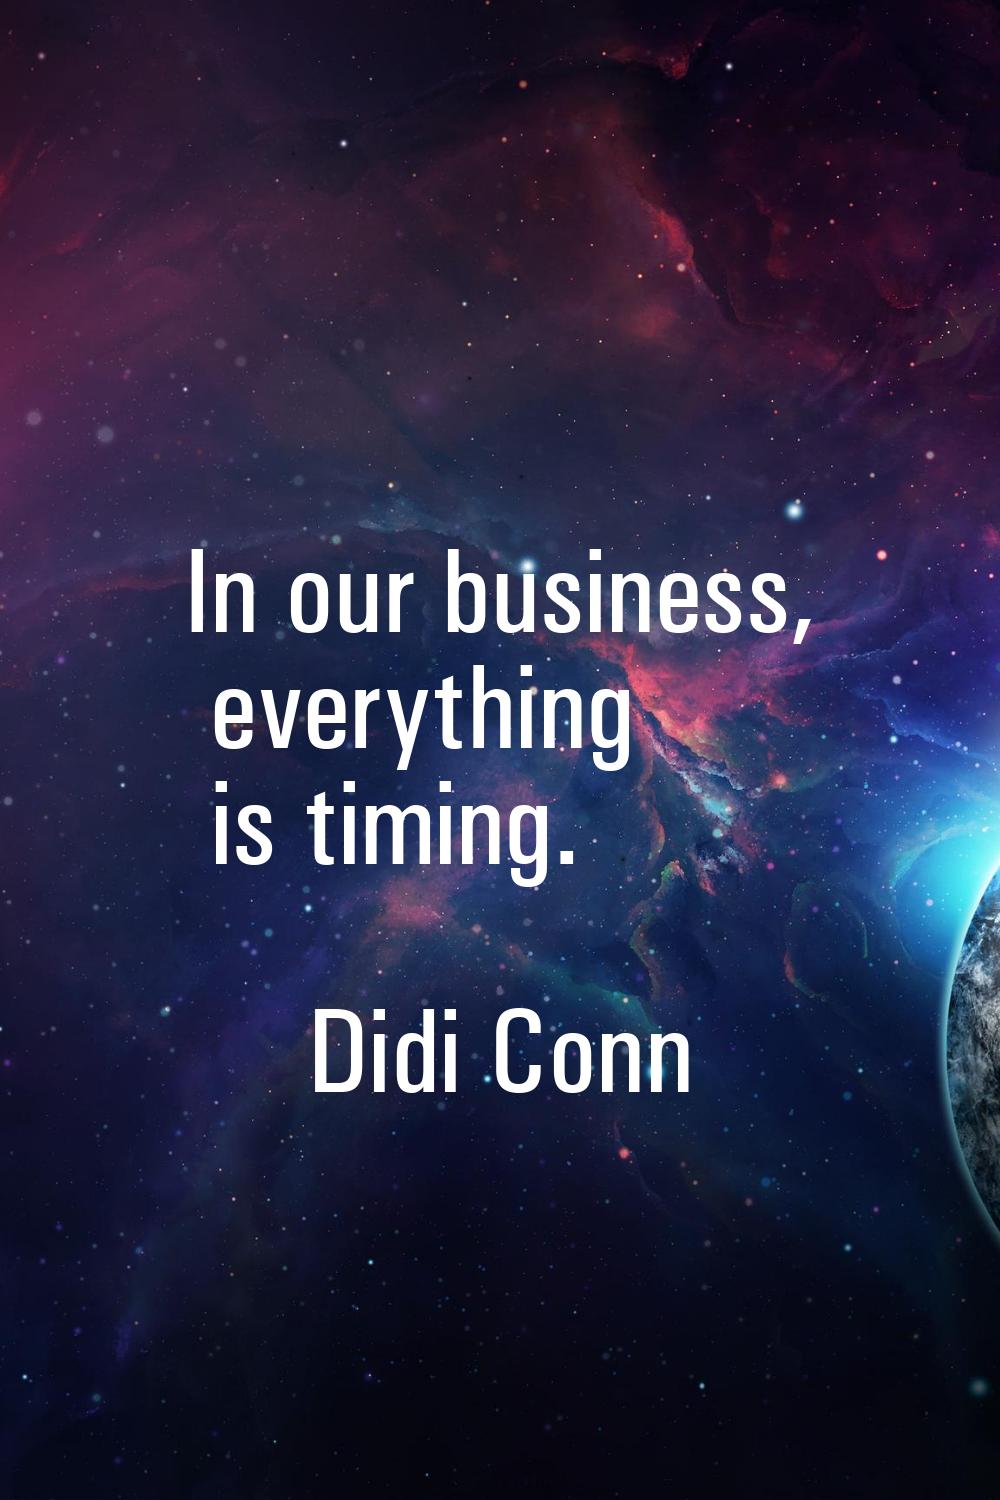 In our business, everything is timing.